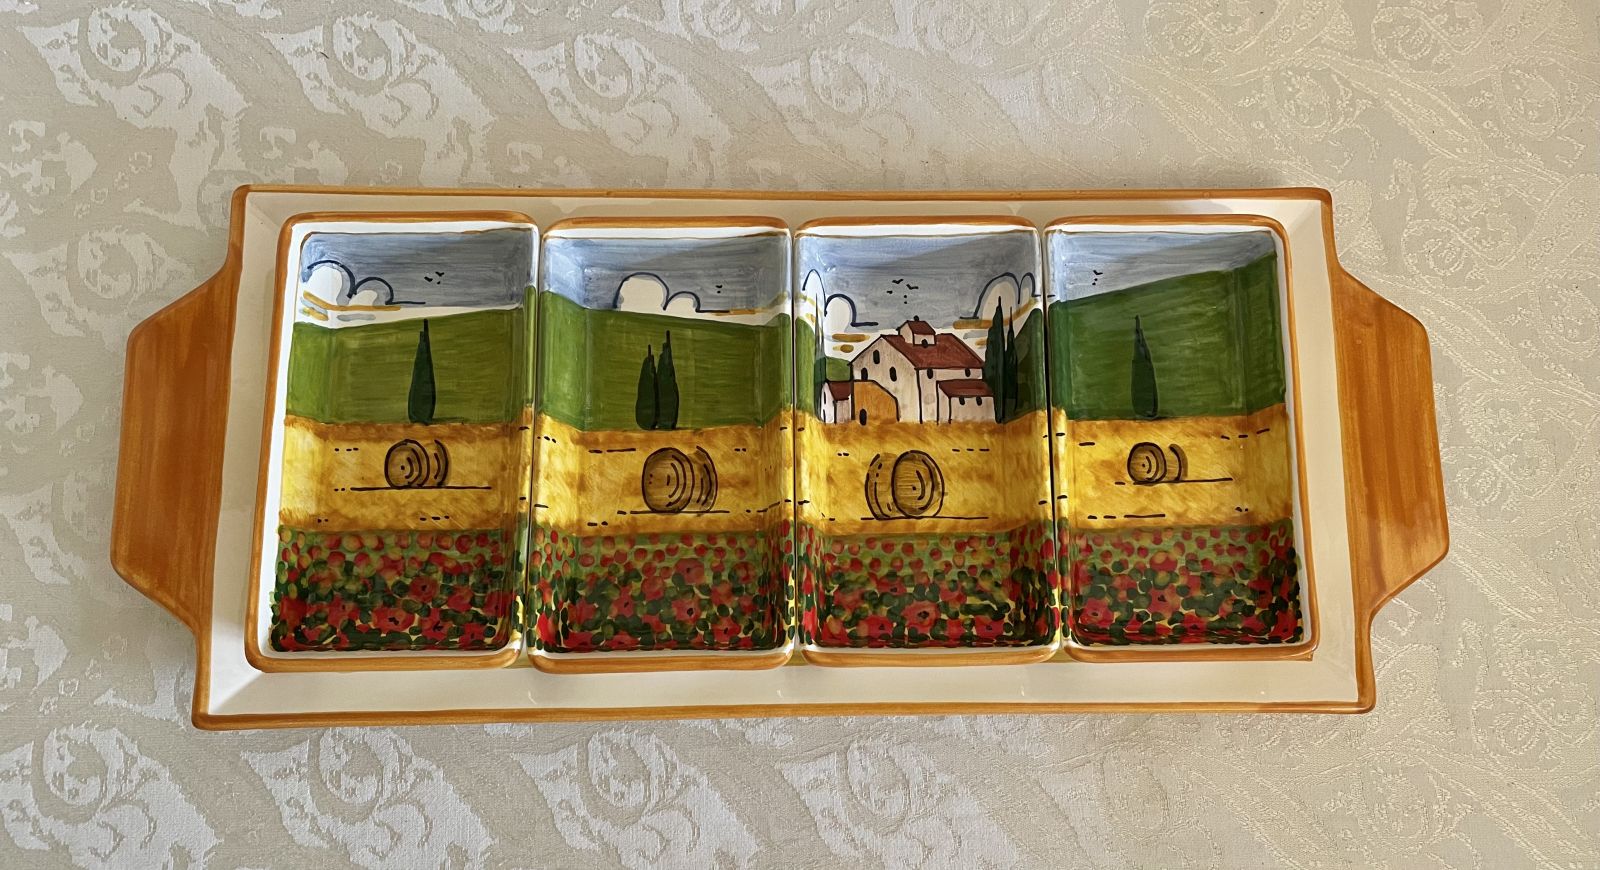 Rectangular hors d'oeuvre dish 44x17 cm with tray and 4 bowls with Tuscan landscape and poppies